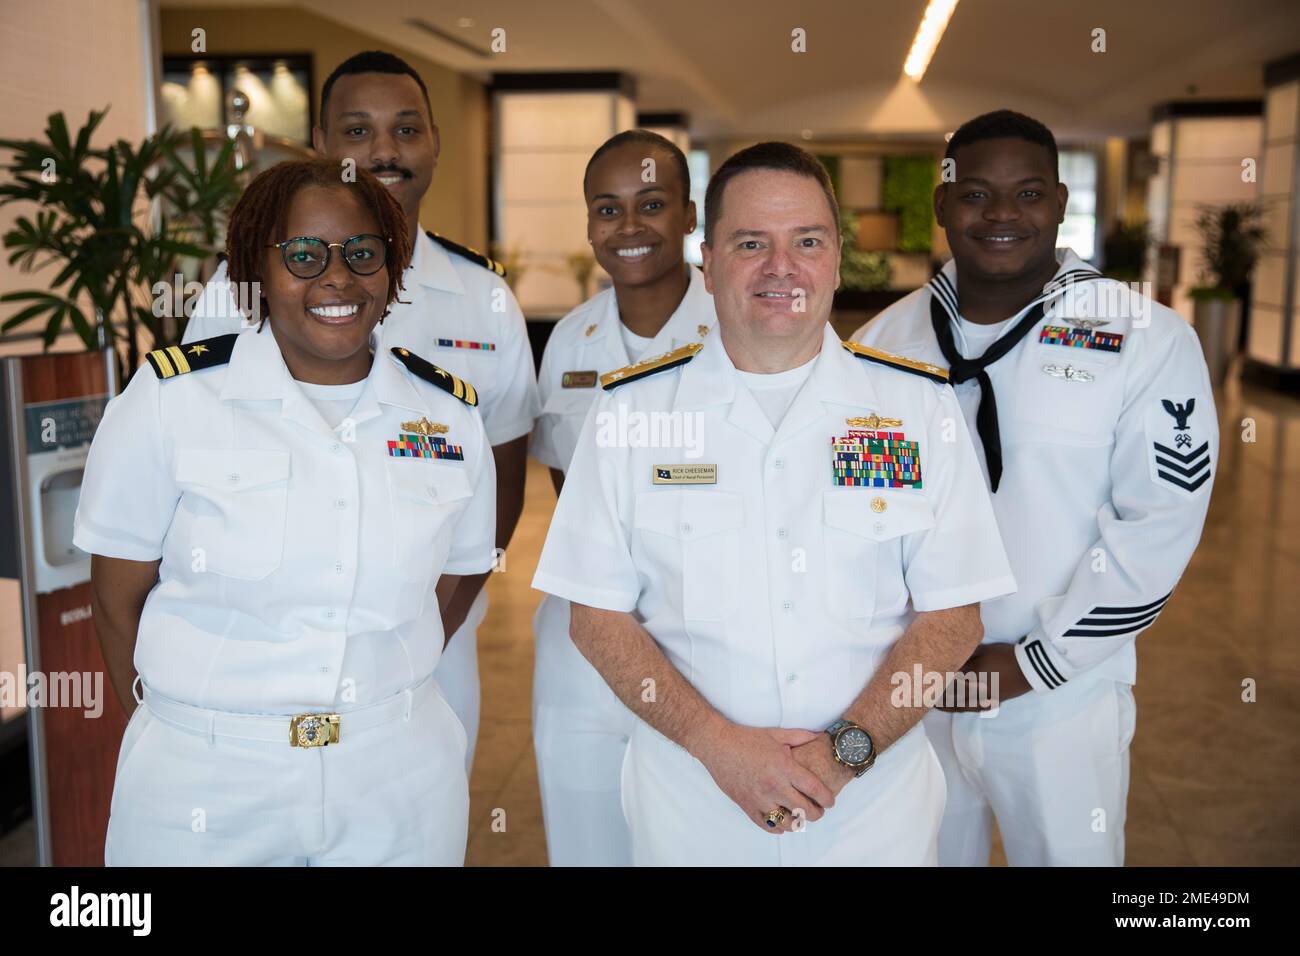 220727-N-TH560-0338 ANNAPOLIS, Md. (July 27, 2022) – Chief of Naval Personnel Vice Adm. Rick Cheeseman poses for a photo with Sailors at the National Naval Officers Association (NNOA) 50th Year Symposium, July 27, 2022. The annual NNOA conference aims to increase attendees’ overall awareness of issues affecting the sea service while hosting educational and professional development workshops, seminars, and exhibits. Stock Photo